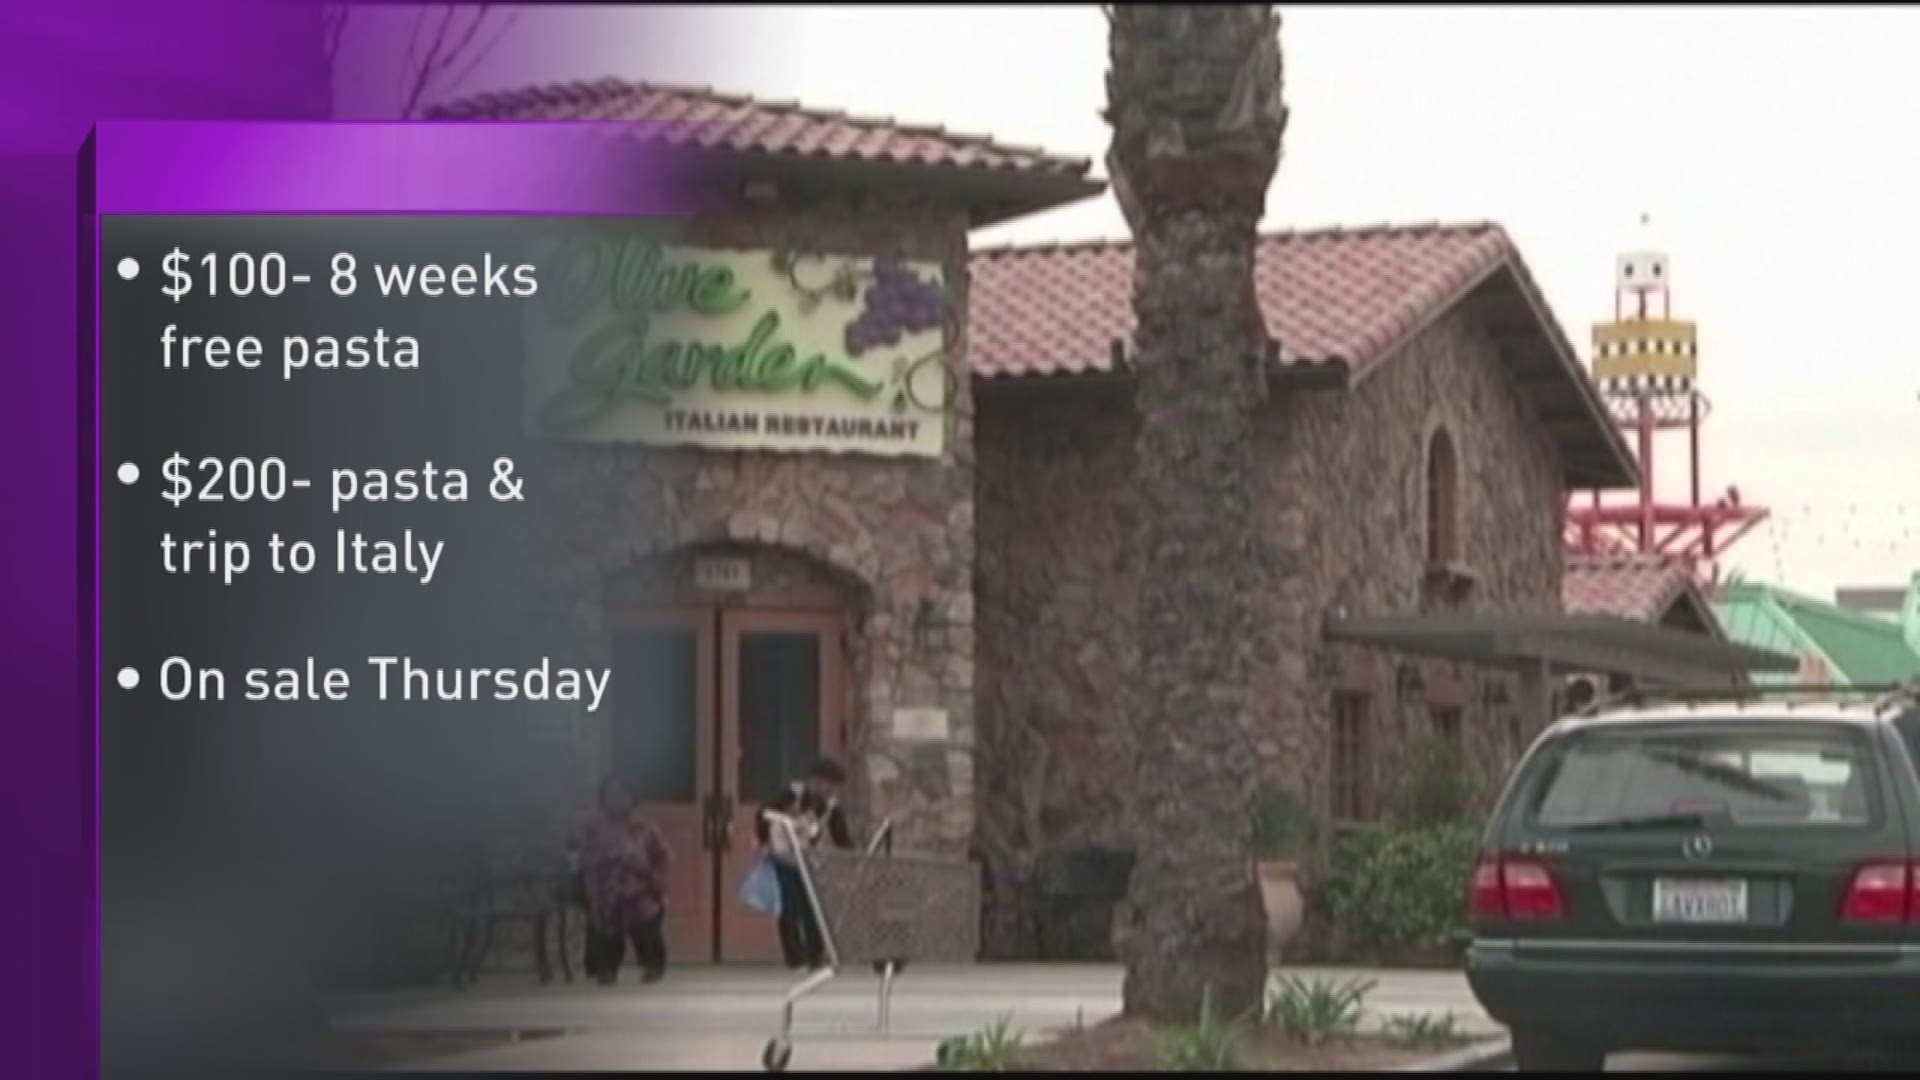 Olive Garden's Never Ending Pasta Pass is back this week. And this time, there's an added bonus.